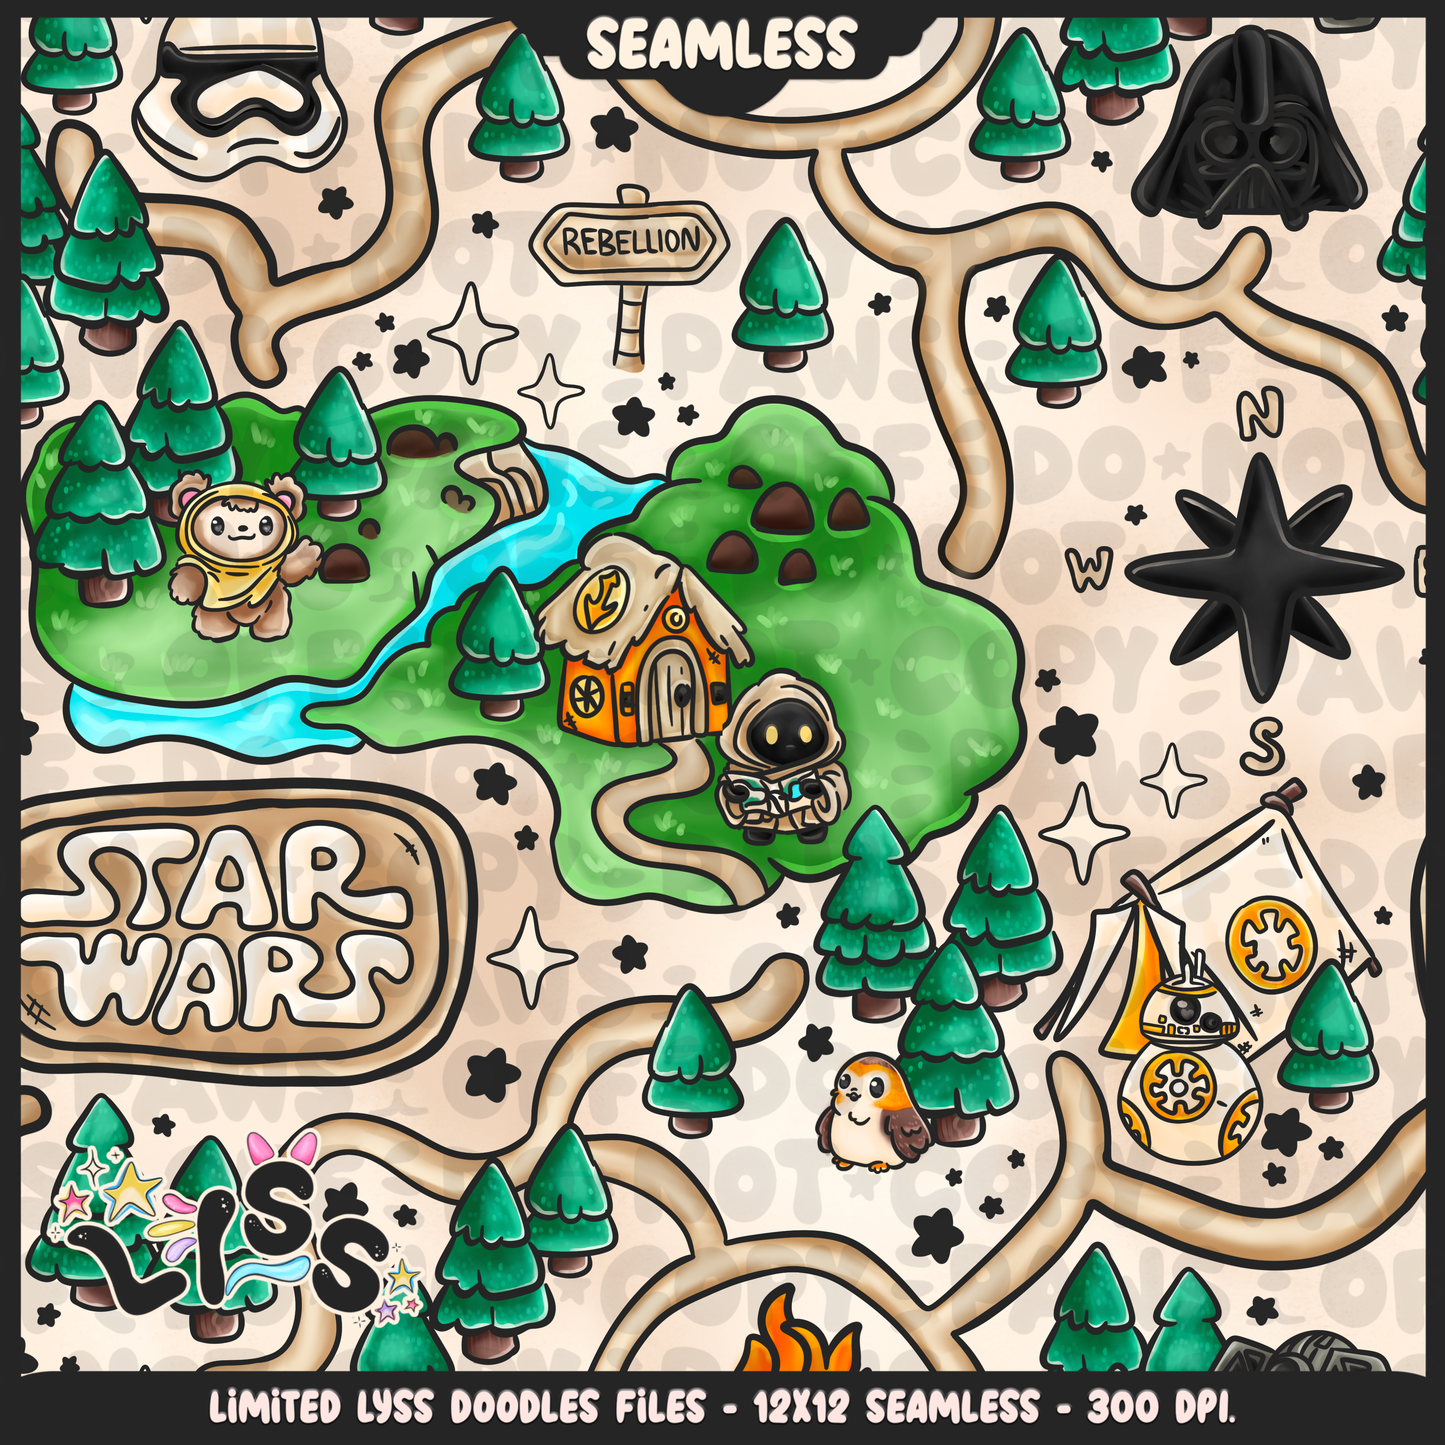 2024 - Lyss Doodles - Seamless - Mains - May Fourth Event - Adventure Wars - 24LD043